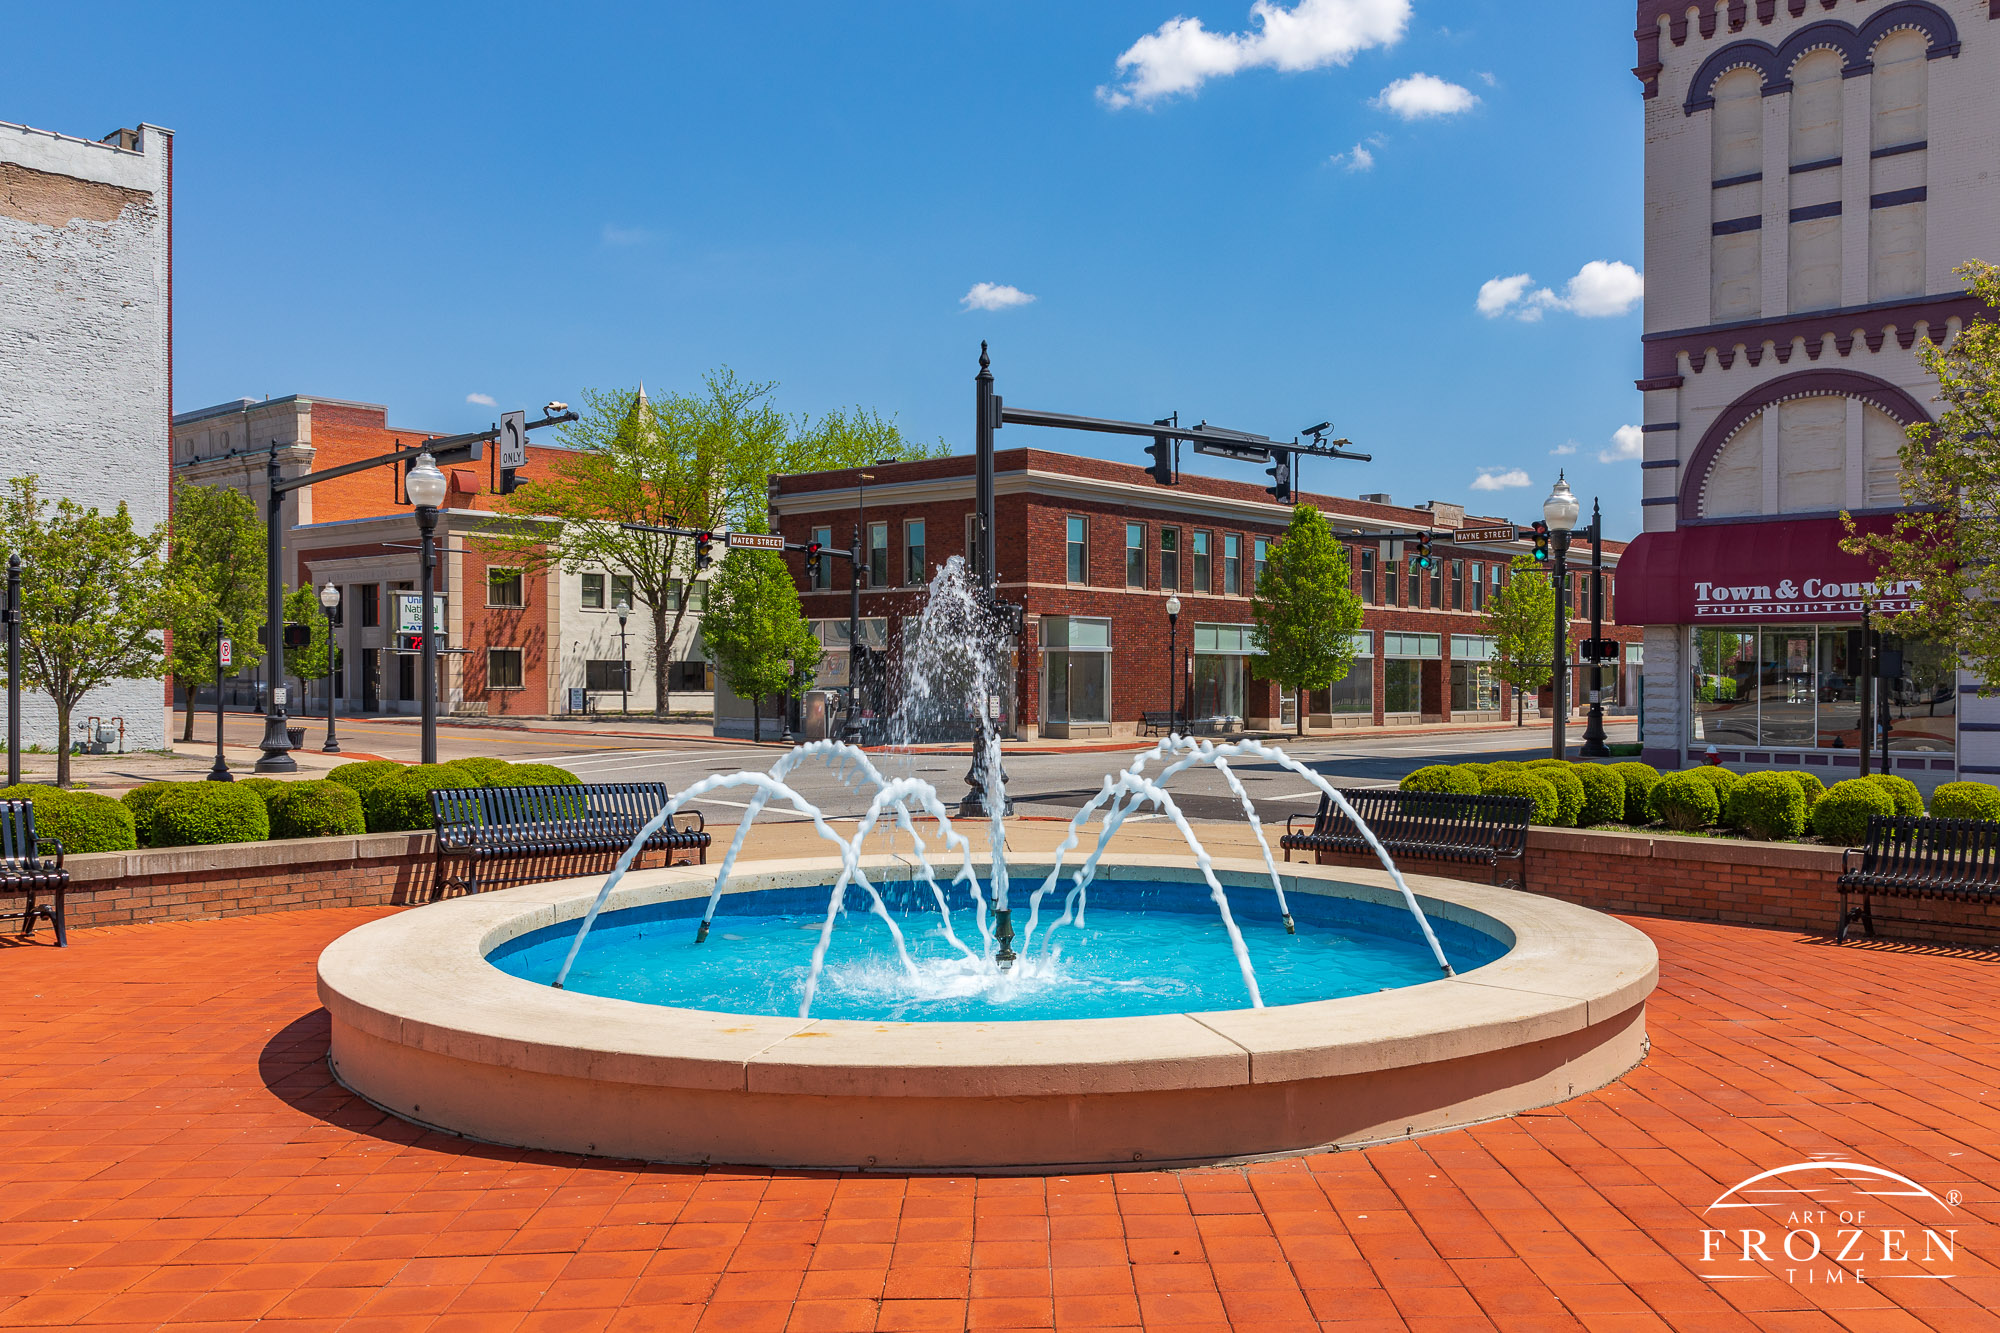 A red paver plaza surrounds a fountain in front of Piqua’s City office building which basks in bright light under a cloudless sky